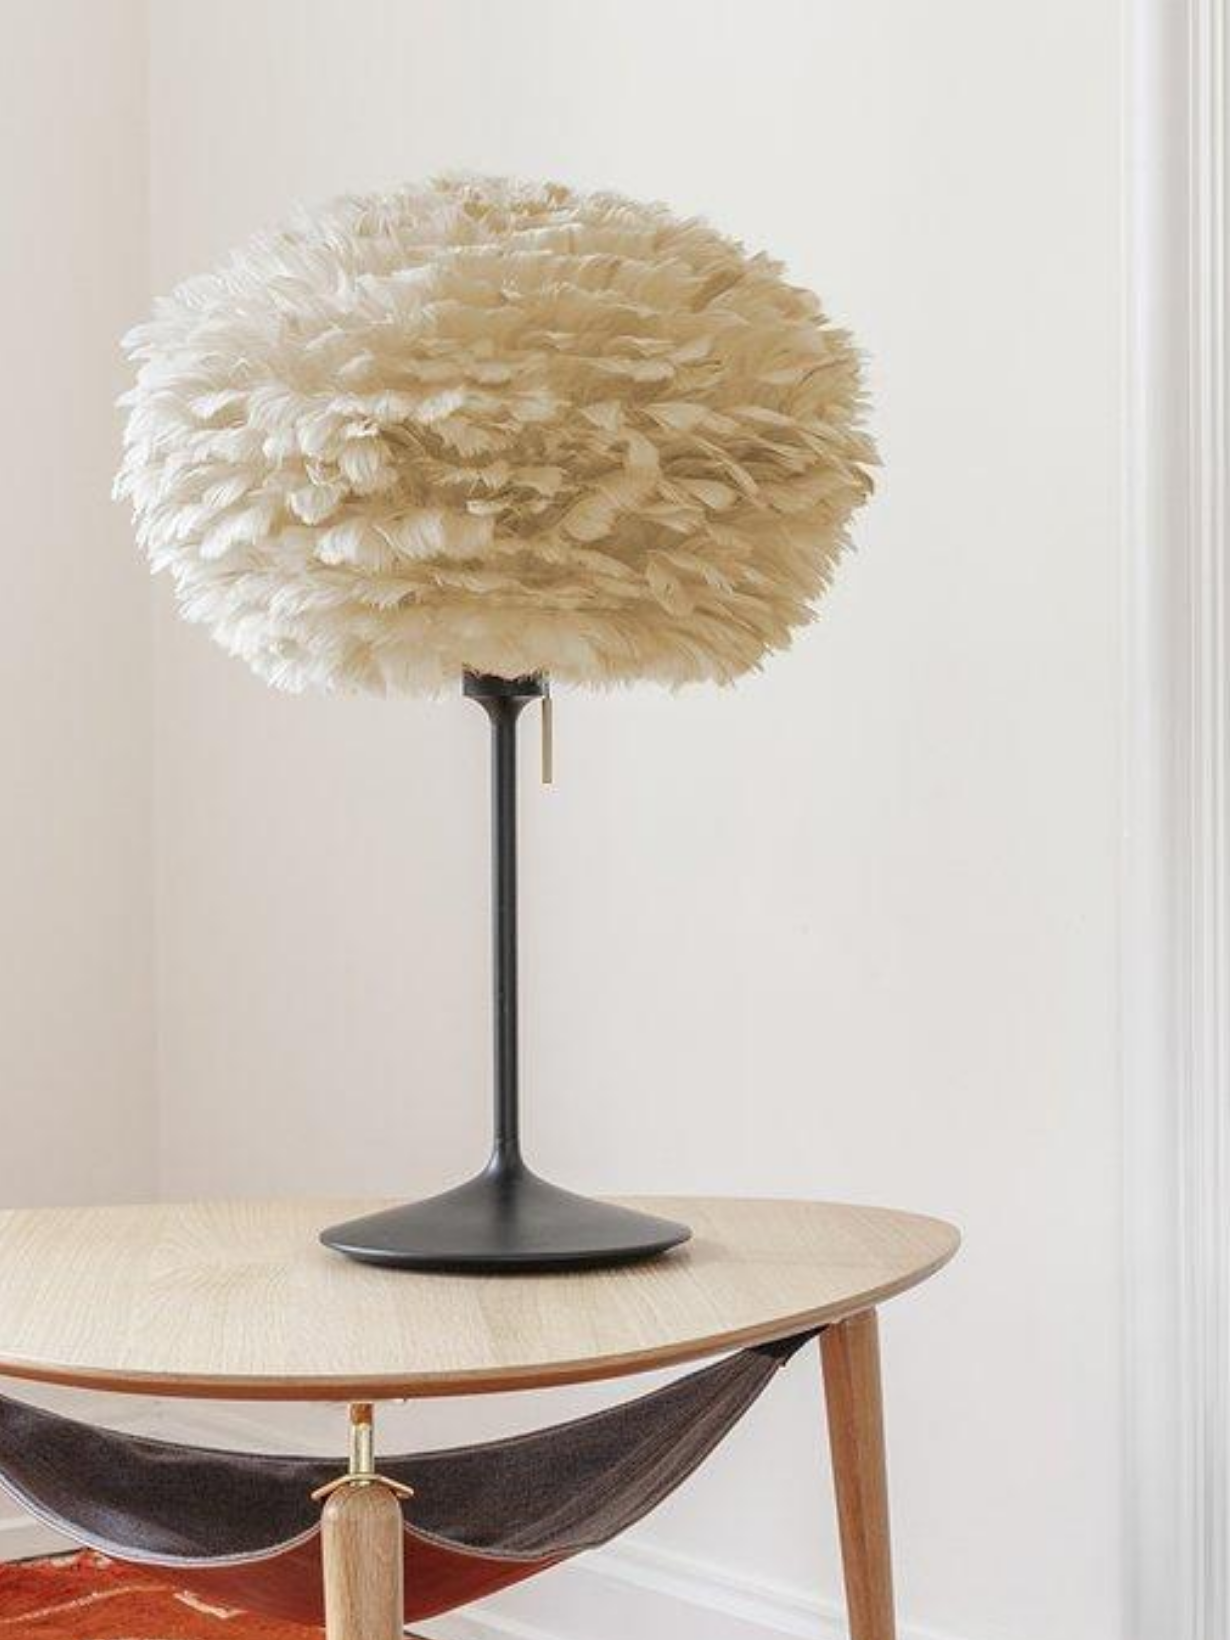 UMAGE - Lamp in goose feather, Eos medium brown and champagne table black - MBS Design